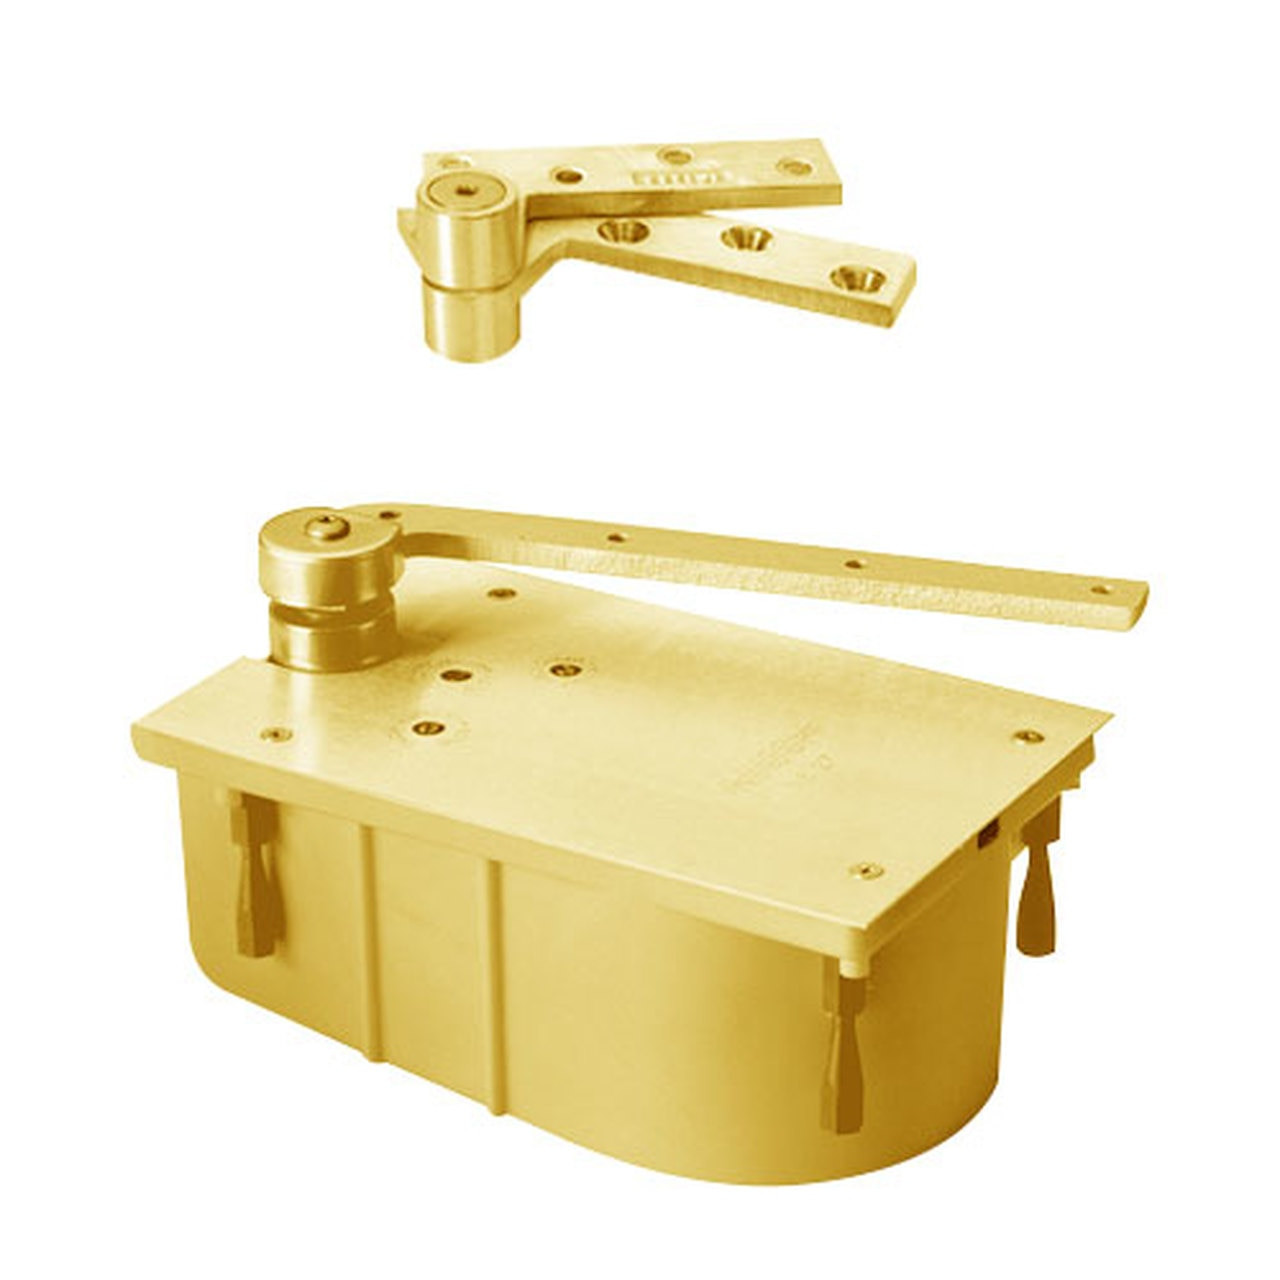 SCF127-95N-RH-605 Rixson 27 Series Fire Rated Heavy Duty 3/4" Offset Hung Floor Closer in Bright Brass Finish